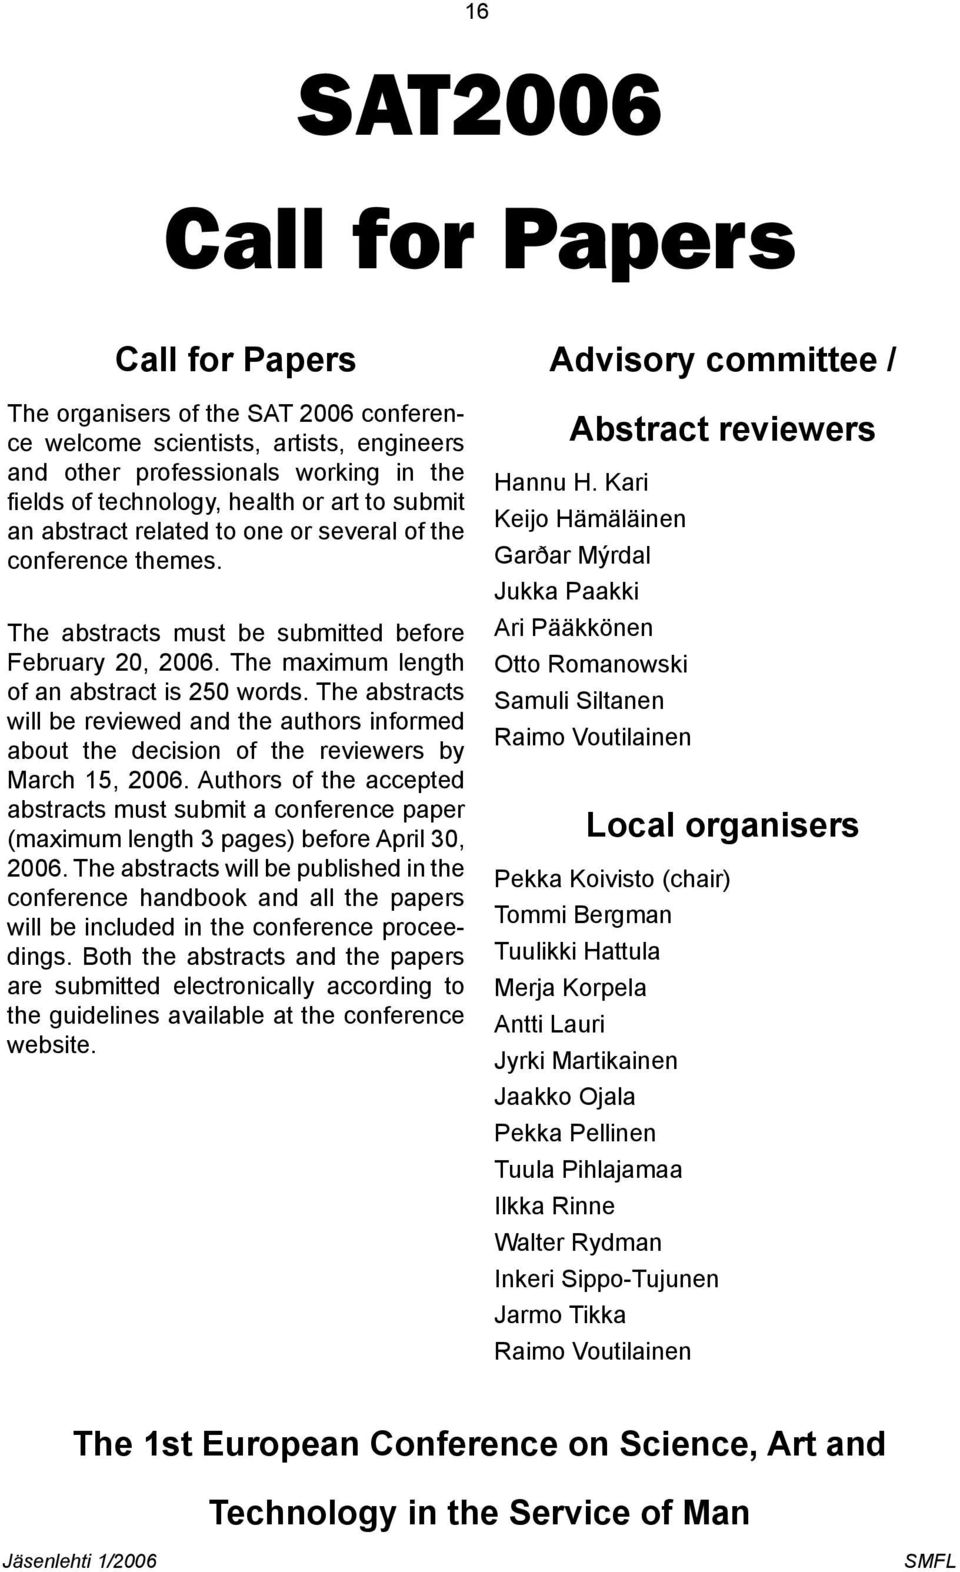 The abstracts will be reviewed and the authors informed about the decision of the reviewers by March 15, 2006.